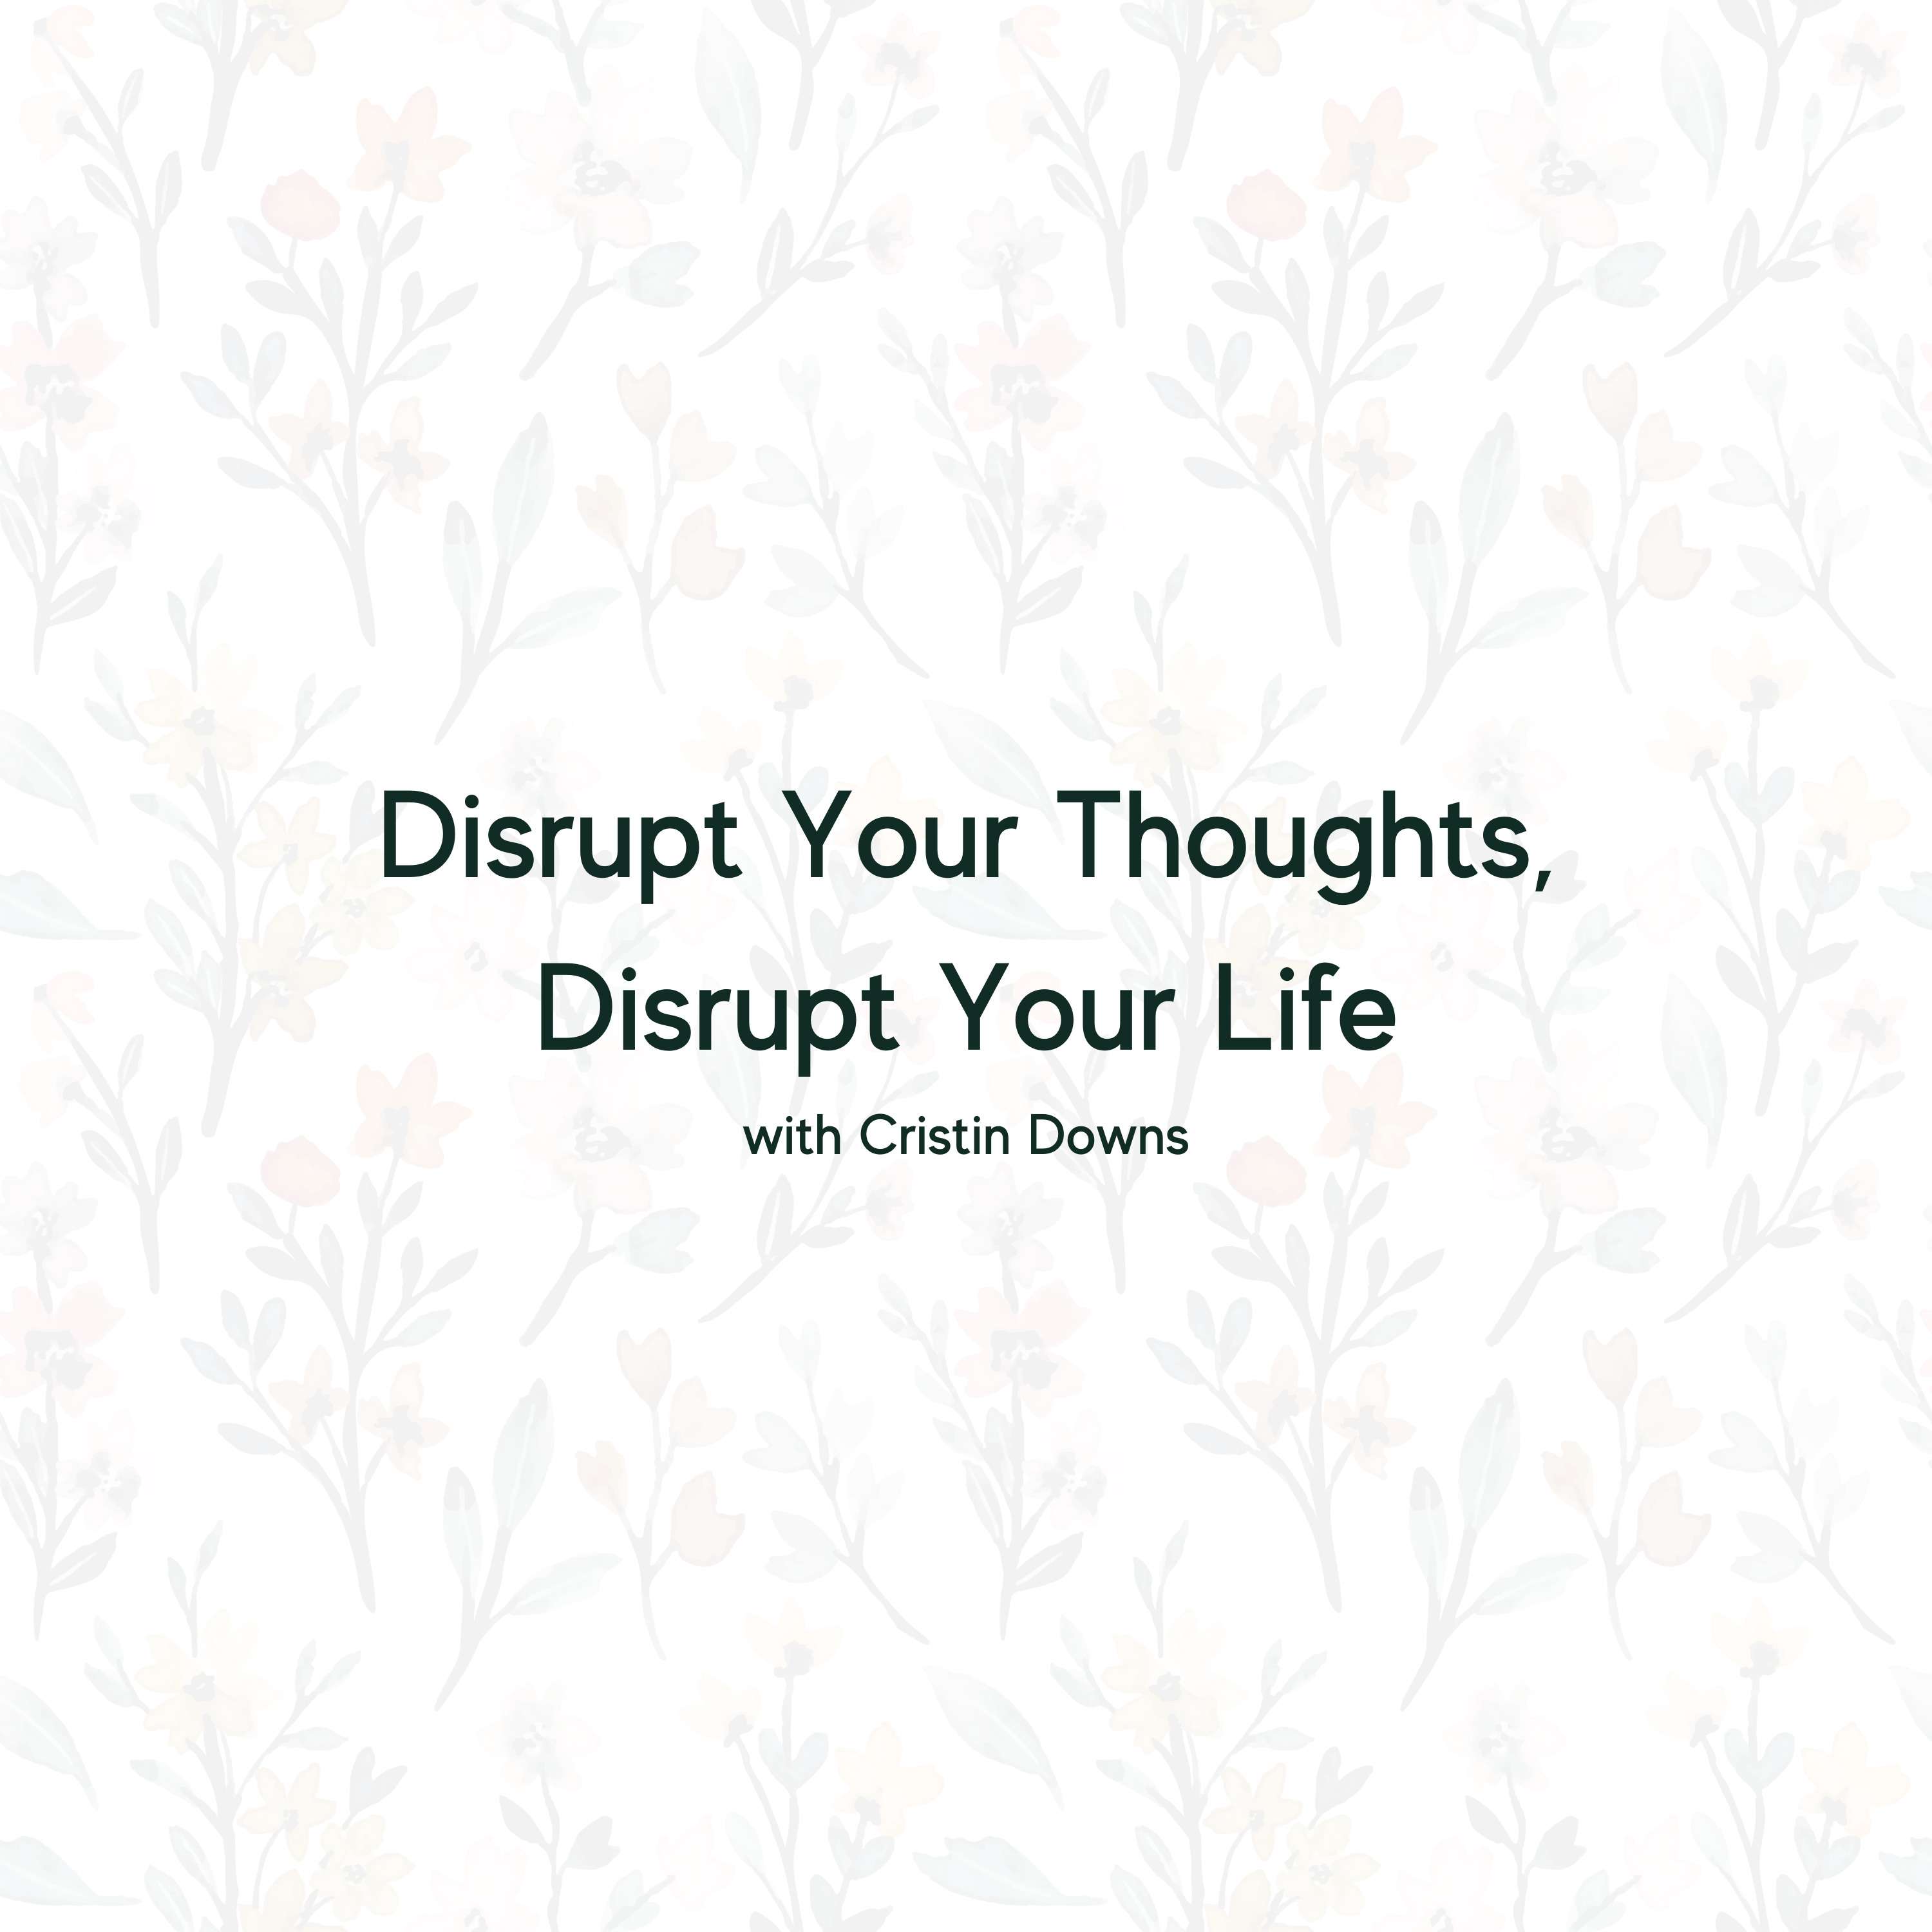 Disrupt Your Thoughts, Disrupt Your Life with Cristin Downs